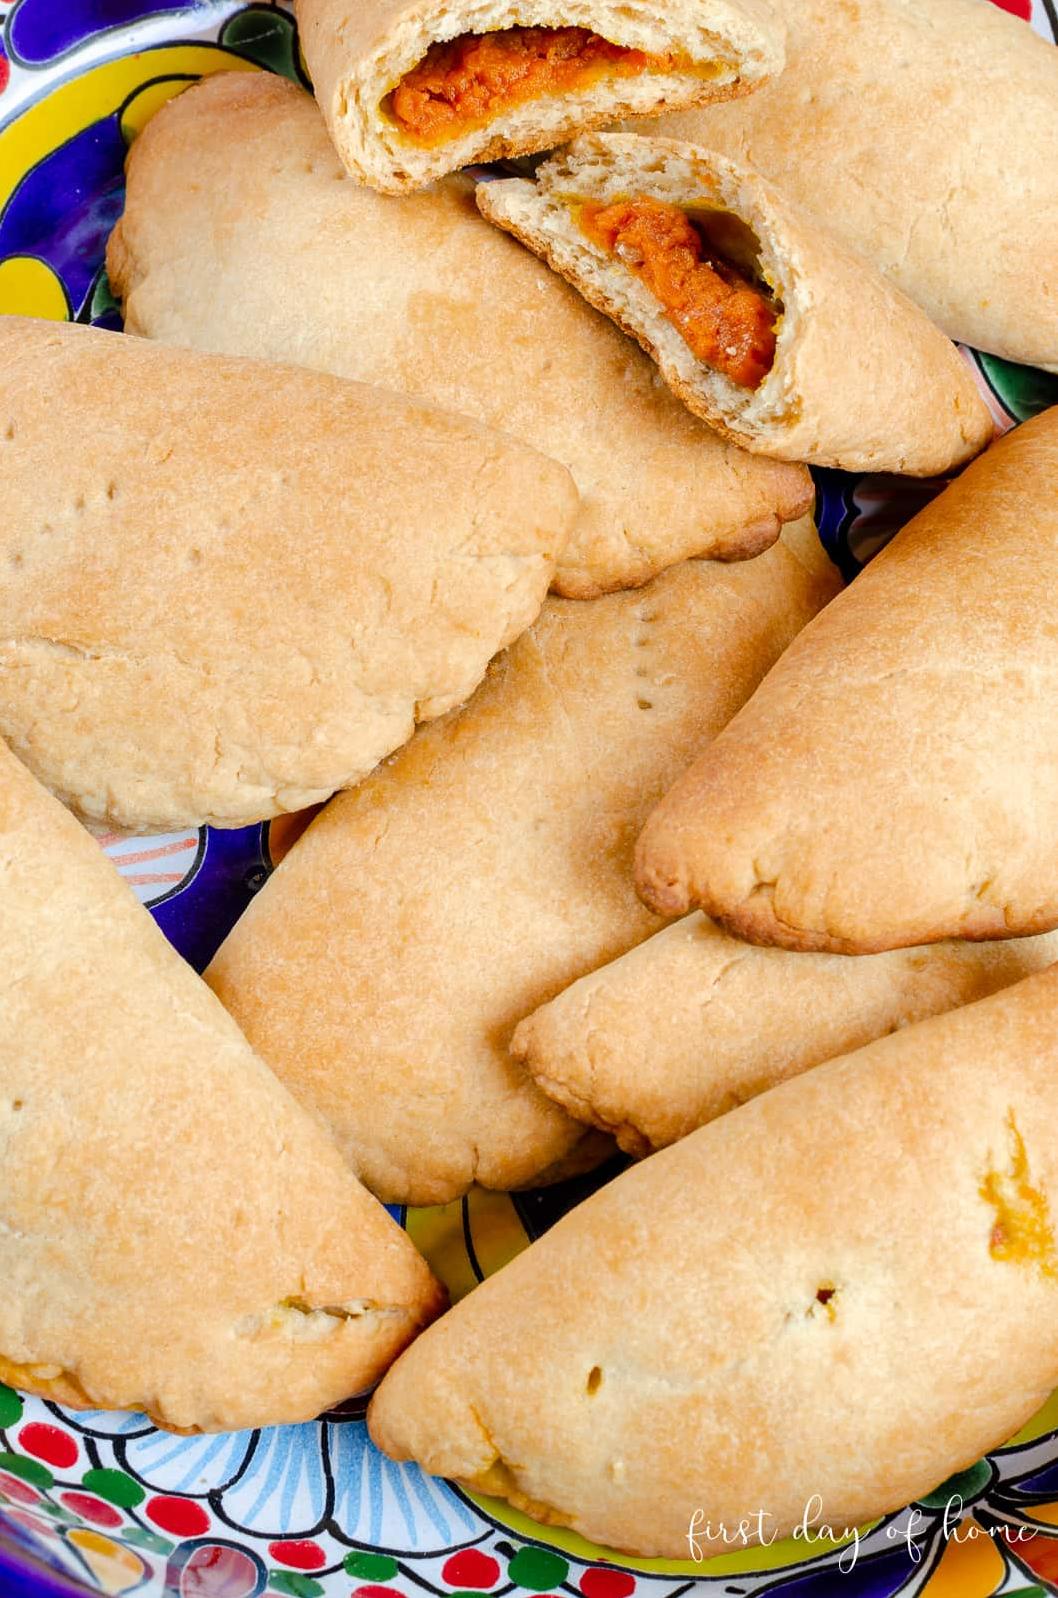  A warm and fragrant pumpkin filling, wrapped in a crispy pastry.